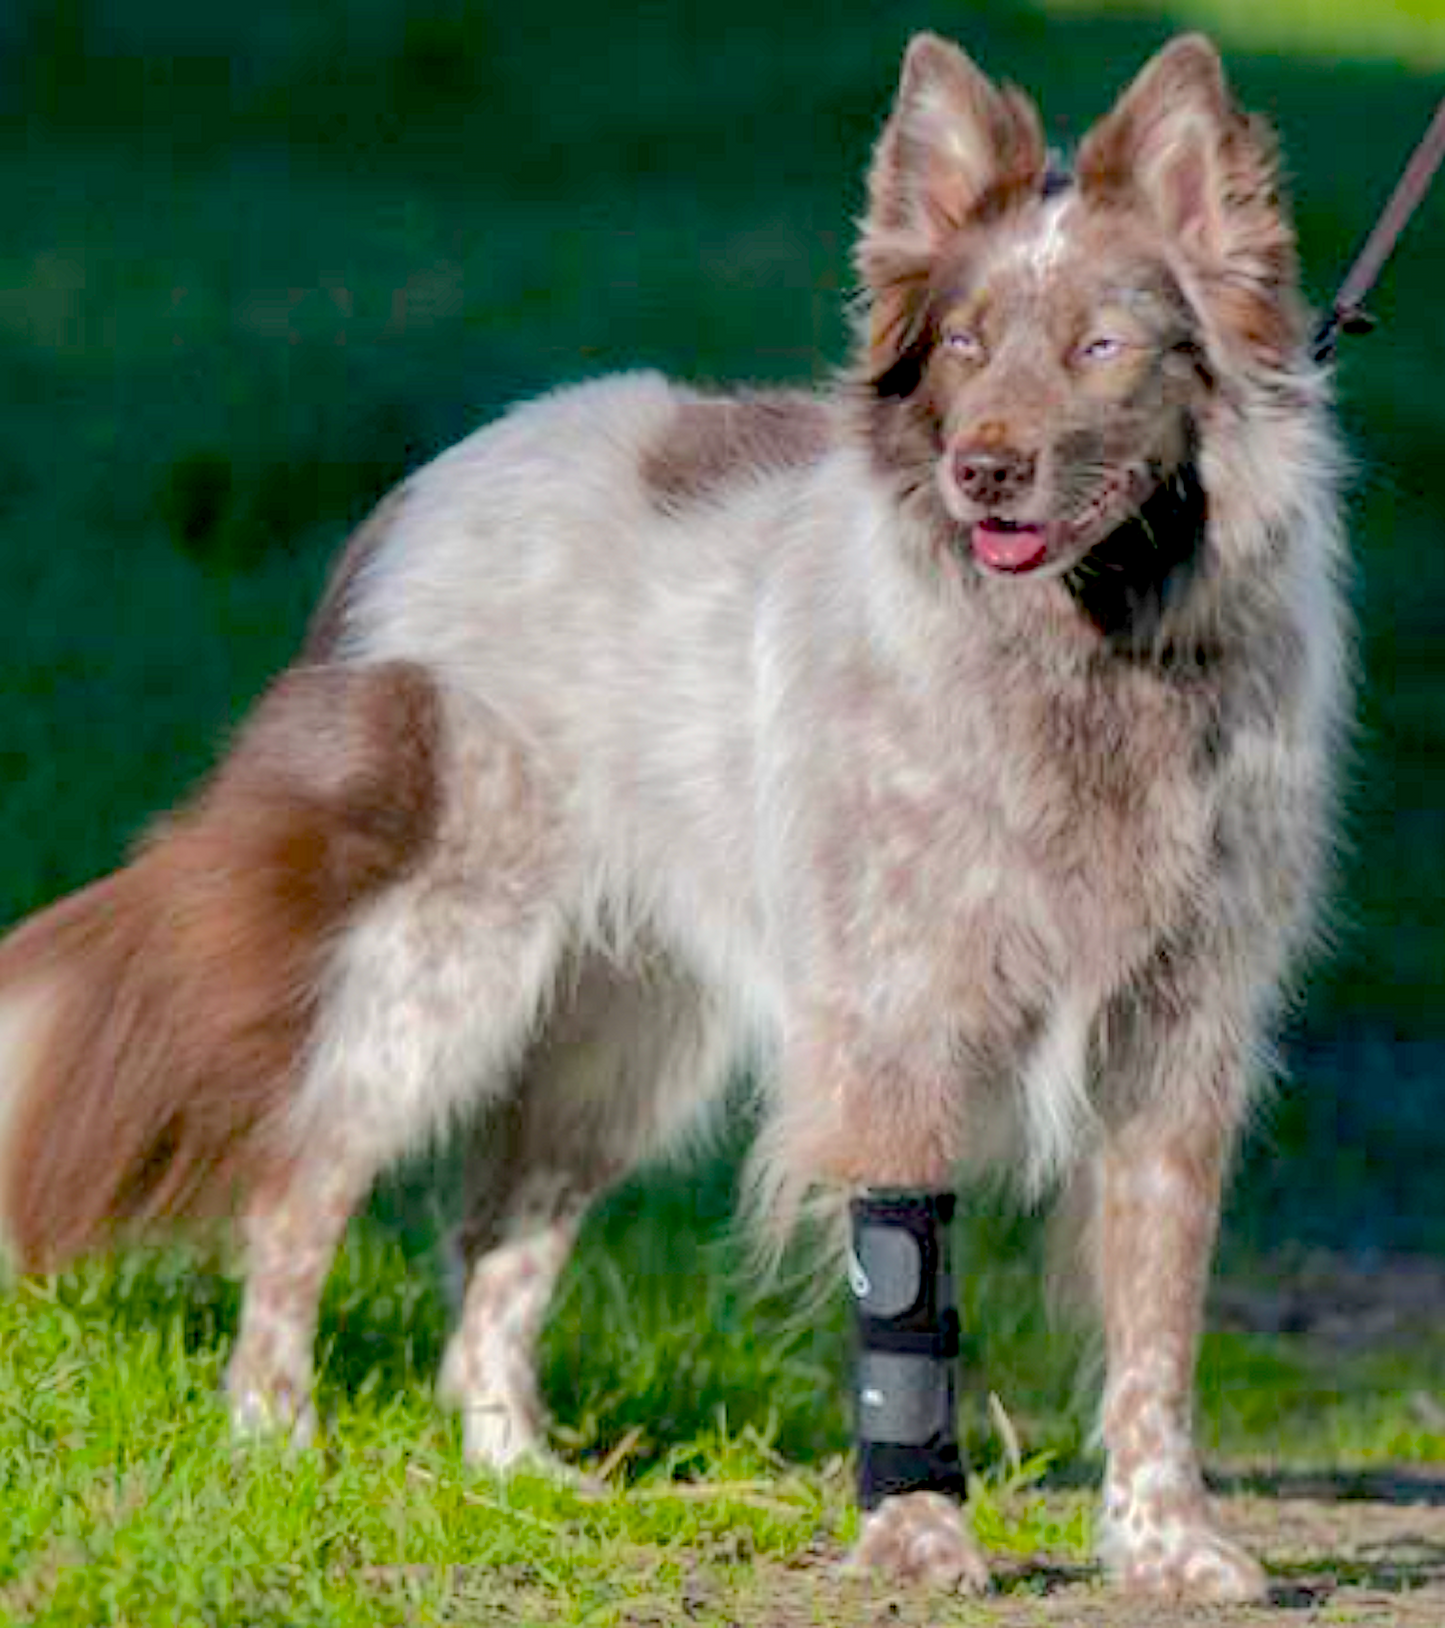 WALKABOUT FRONT LEG/CARPAL WRAPS: provides mild-moderate, flexible support for the lower front leg - Vital Vet